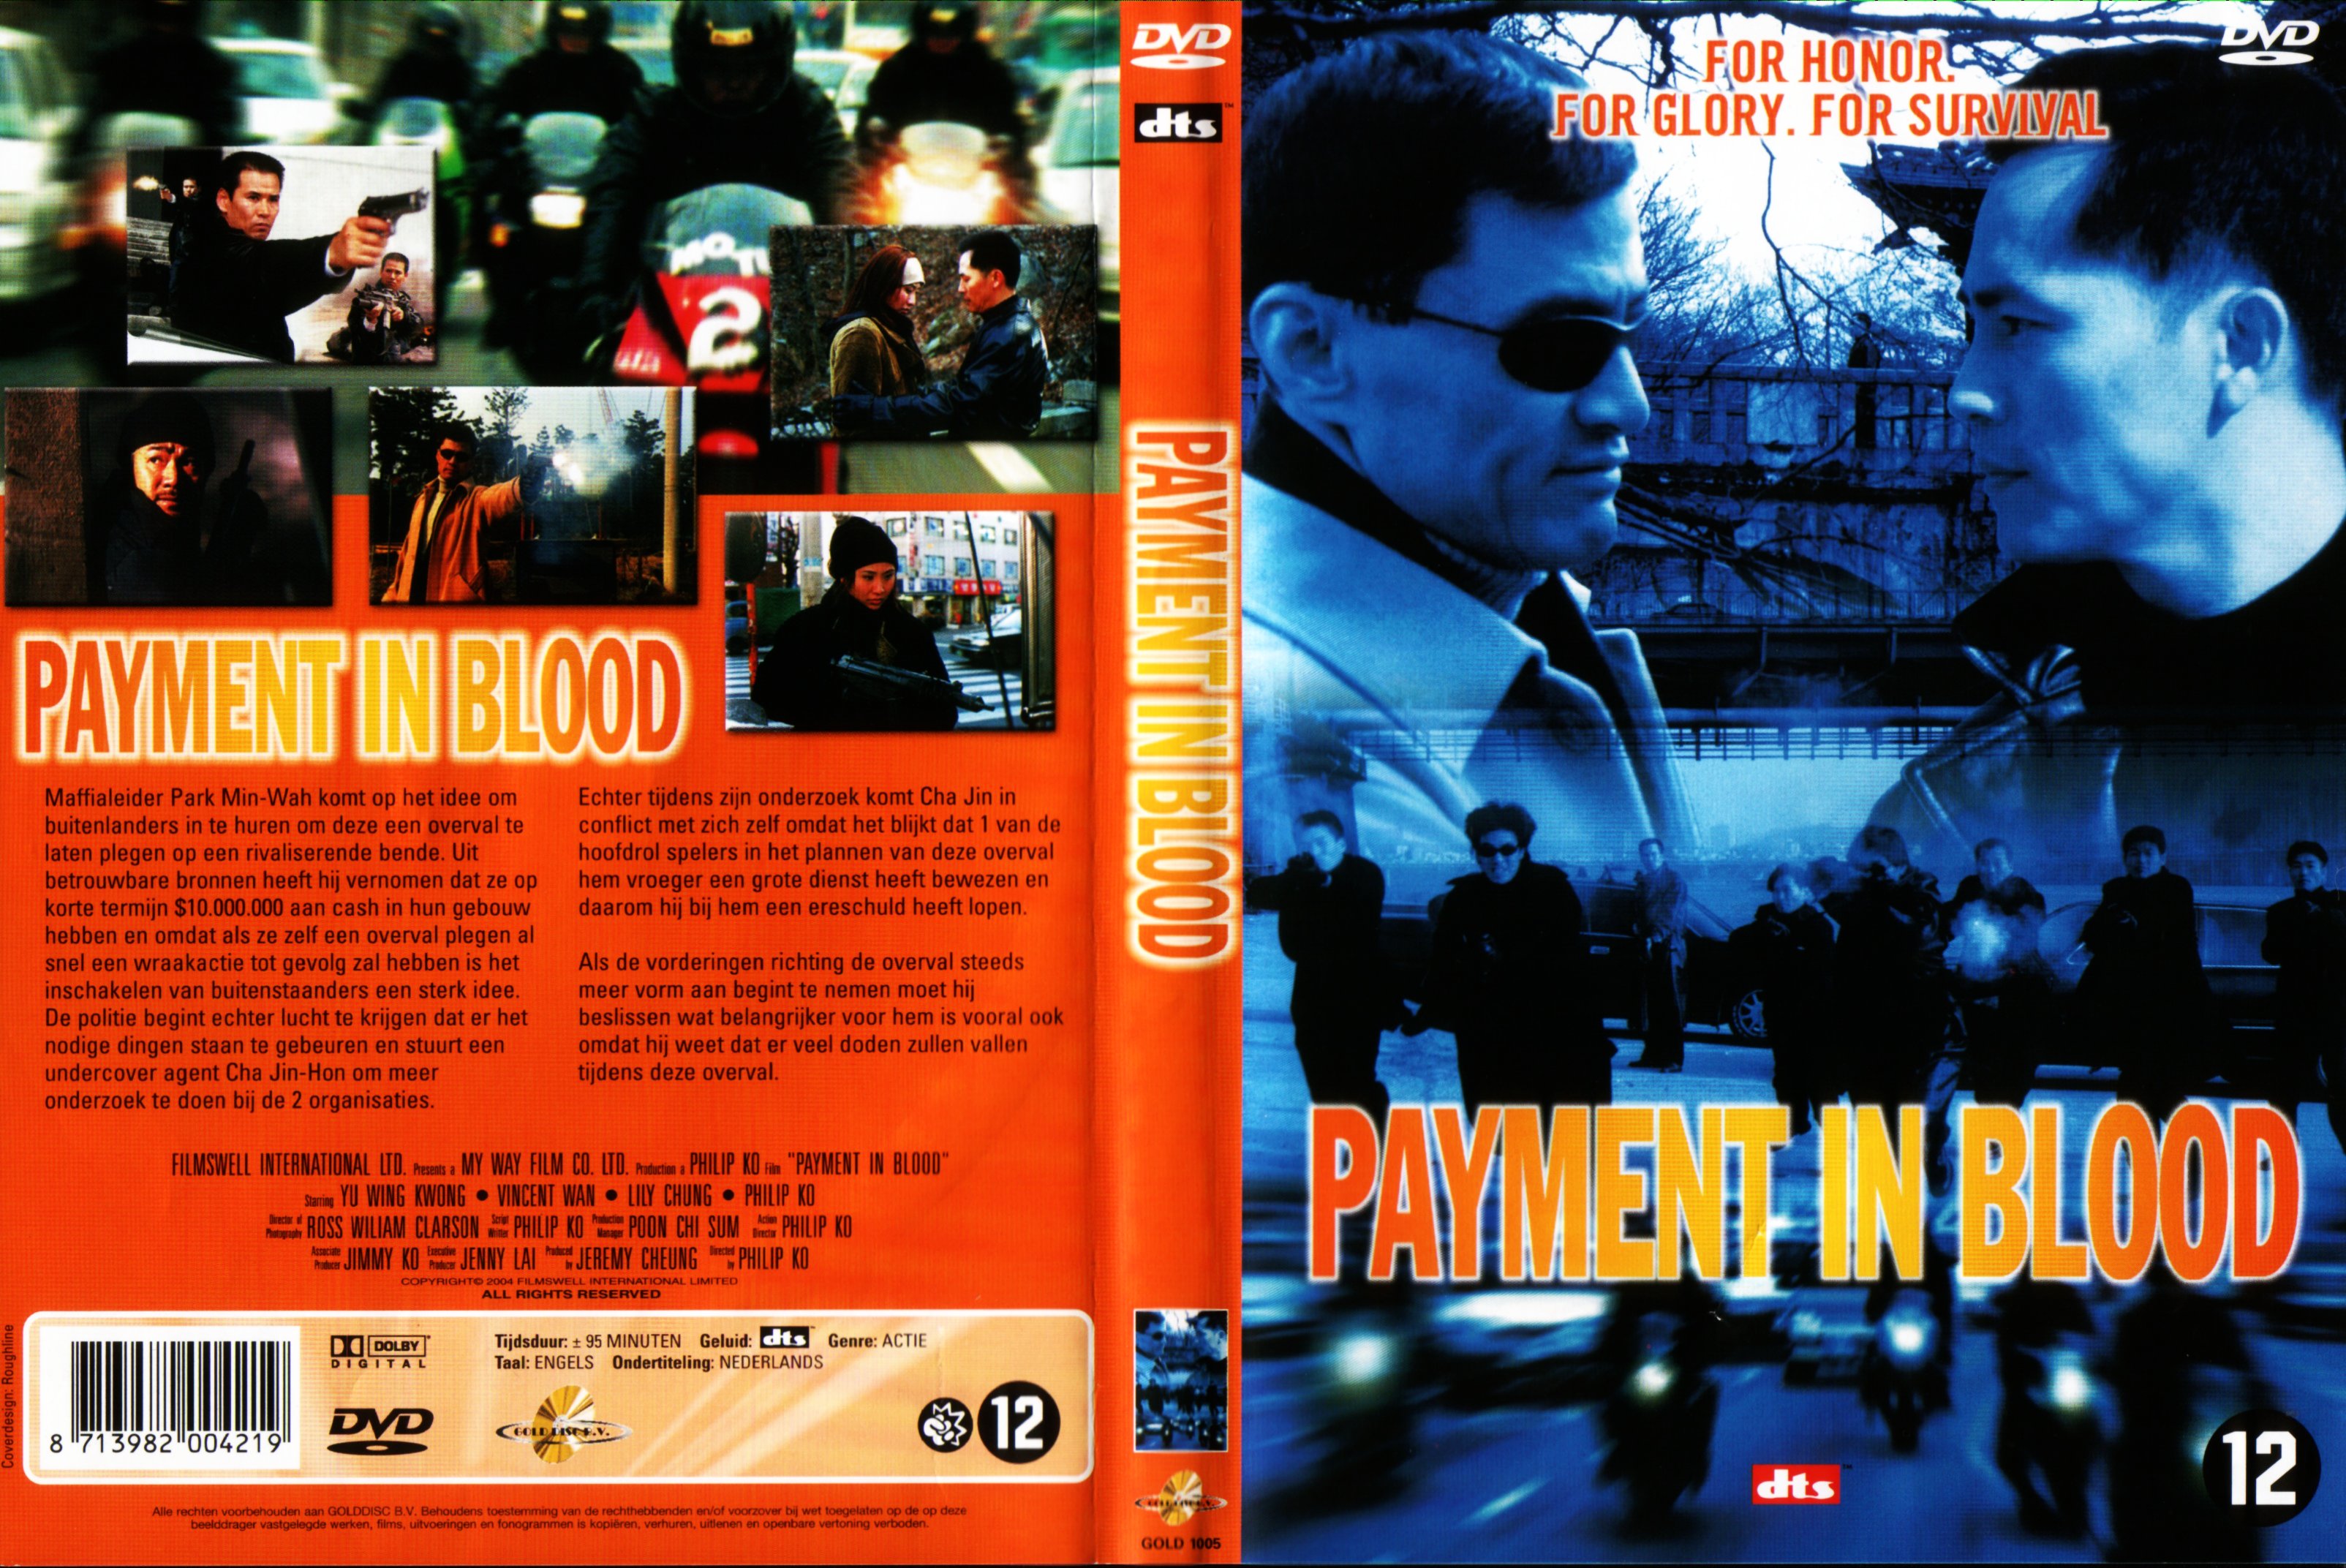 Jaquette DVD Payment in blood Zone 1